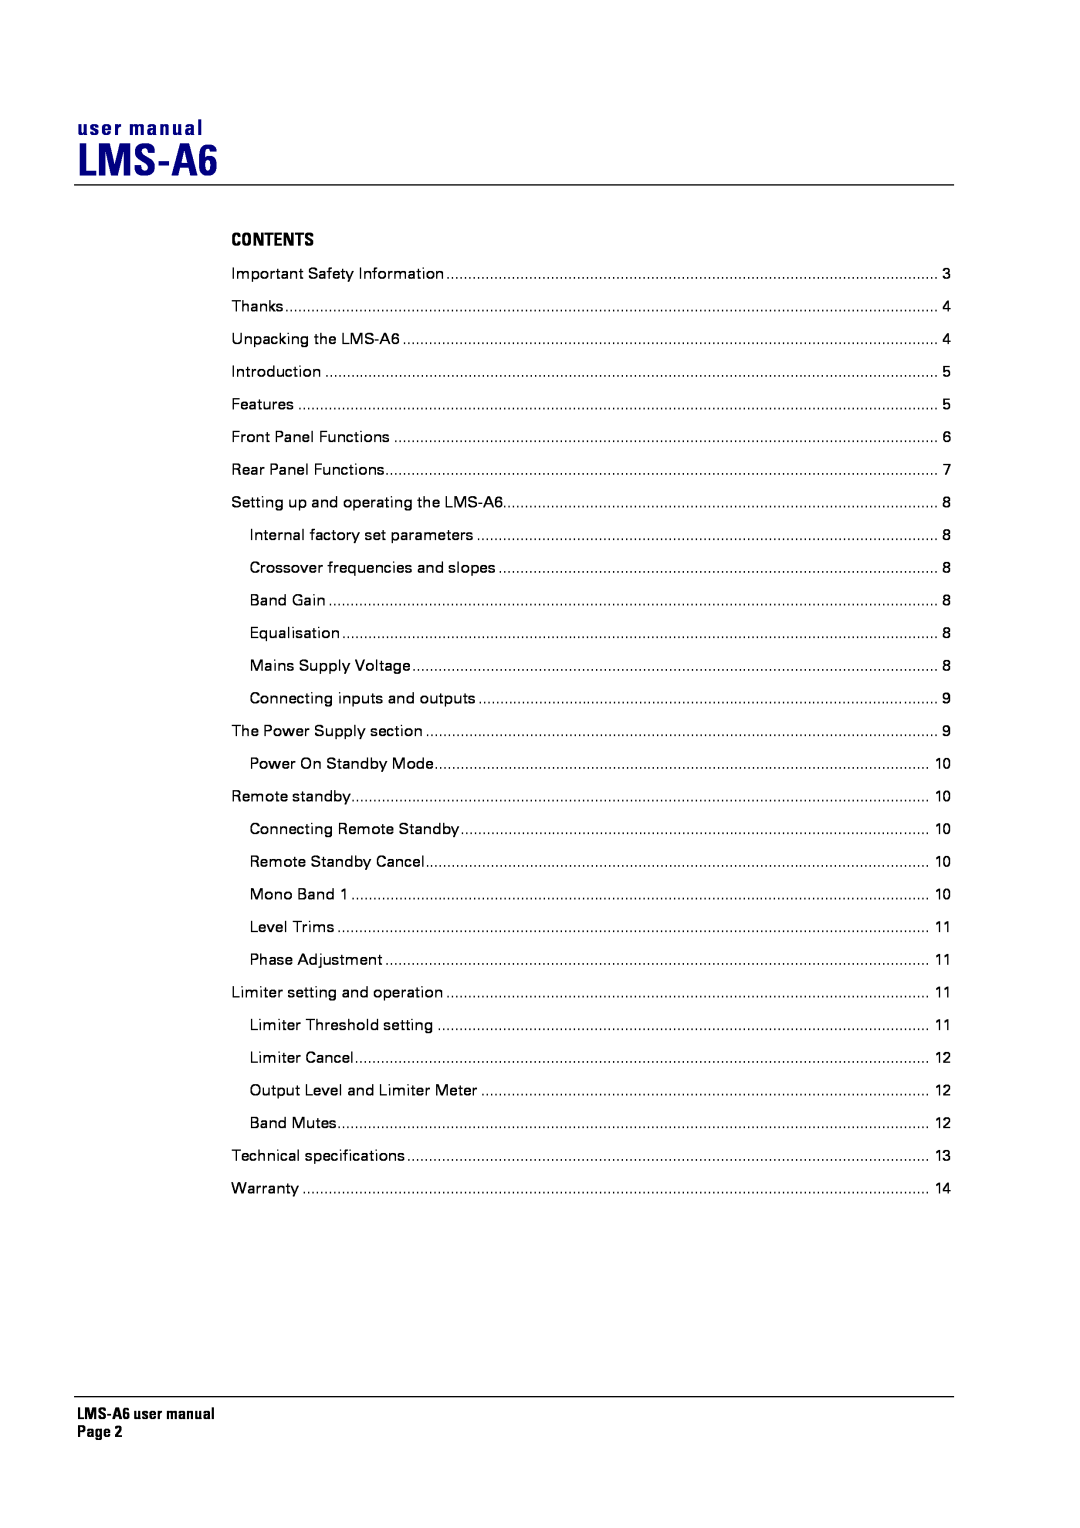 Turbosound LMS-A6 user manual Contents 